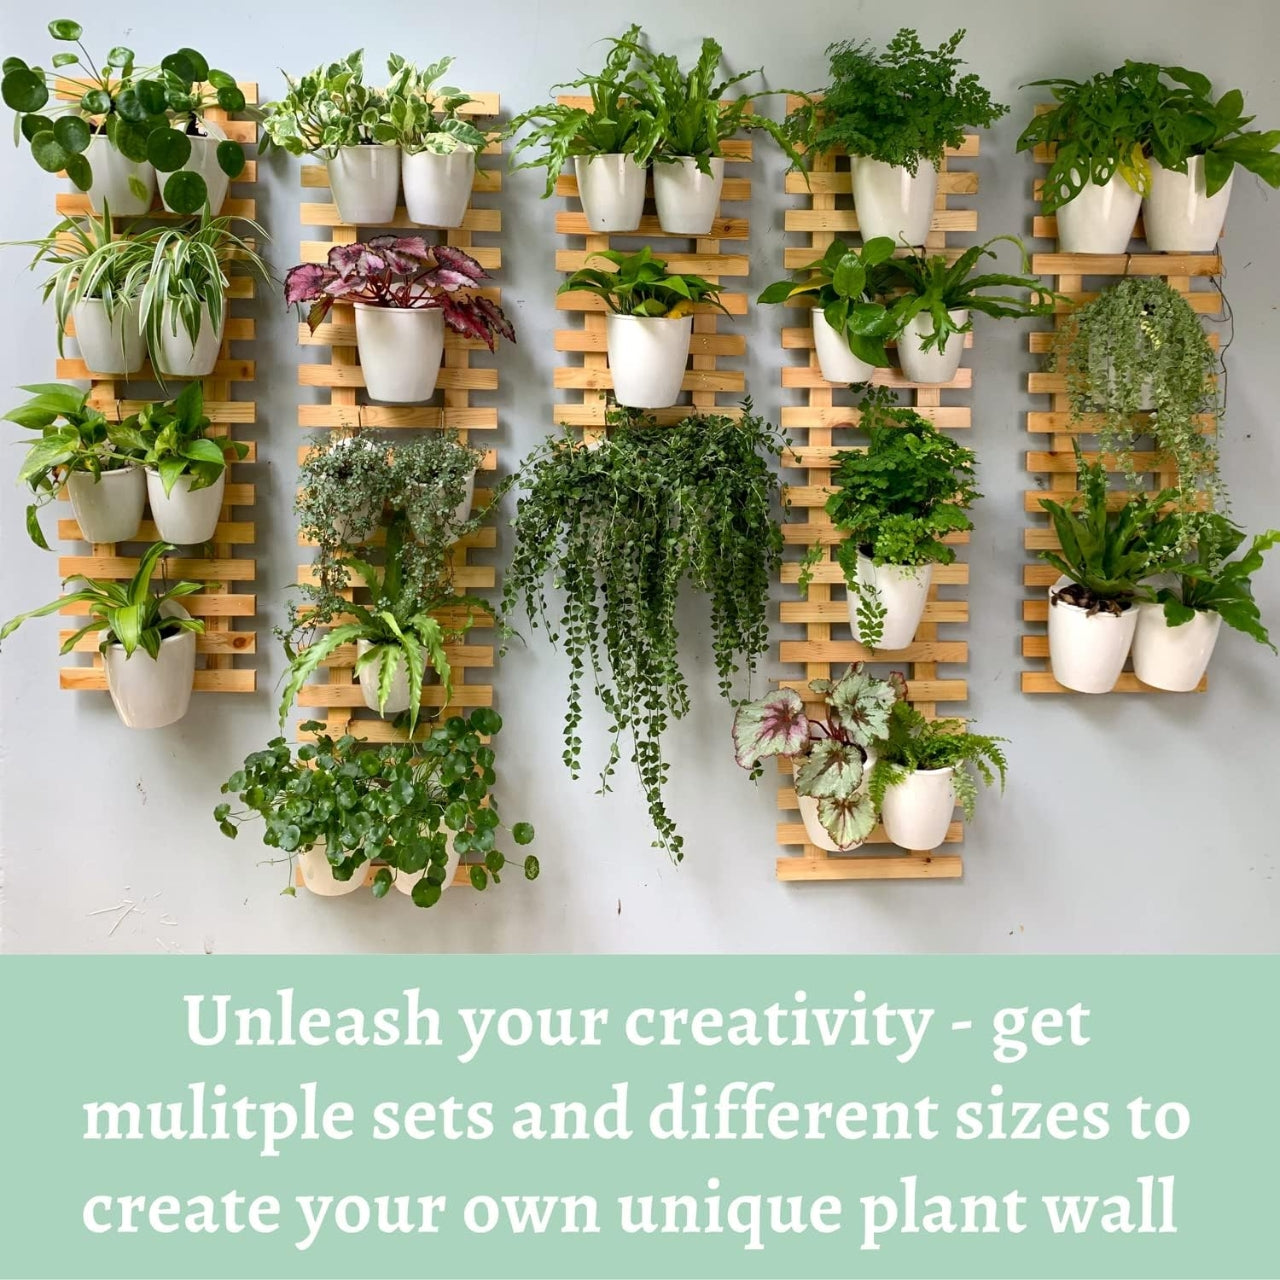 Ecofynd Wooden Hanging Planter Wall Frame